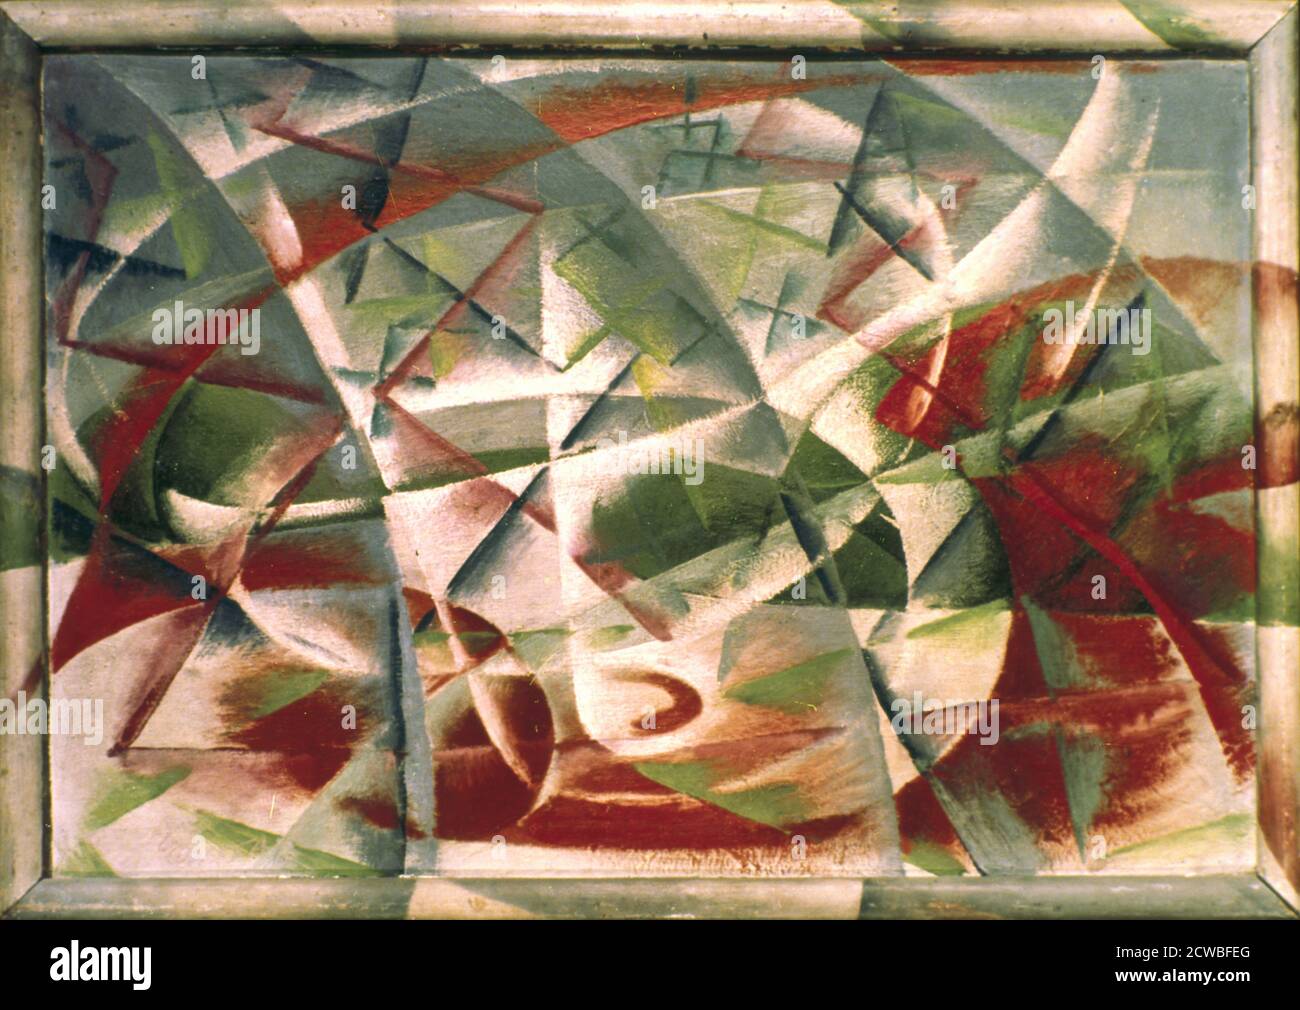 Abstract speed and noise' 1913-14 by Giacomo Balla. Giacomo Balla (18 July 1871 - 1 March 1958) was an Italian painter, art teacher and poet best known as a key proponent of Futurism. In his paintings he depicted light, movement and speed. Stock Photo